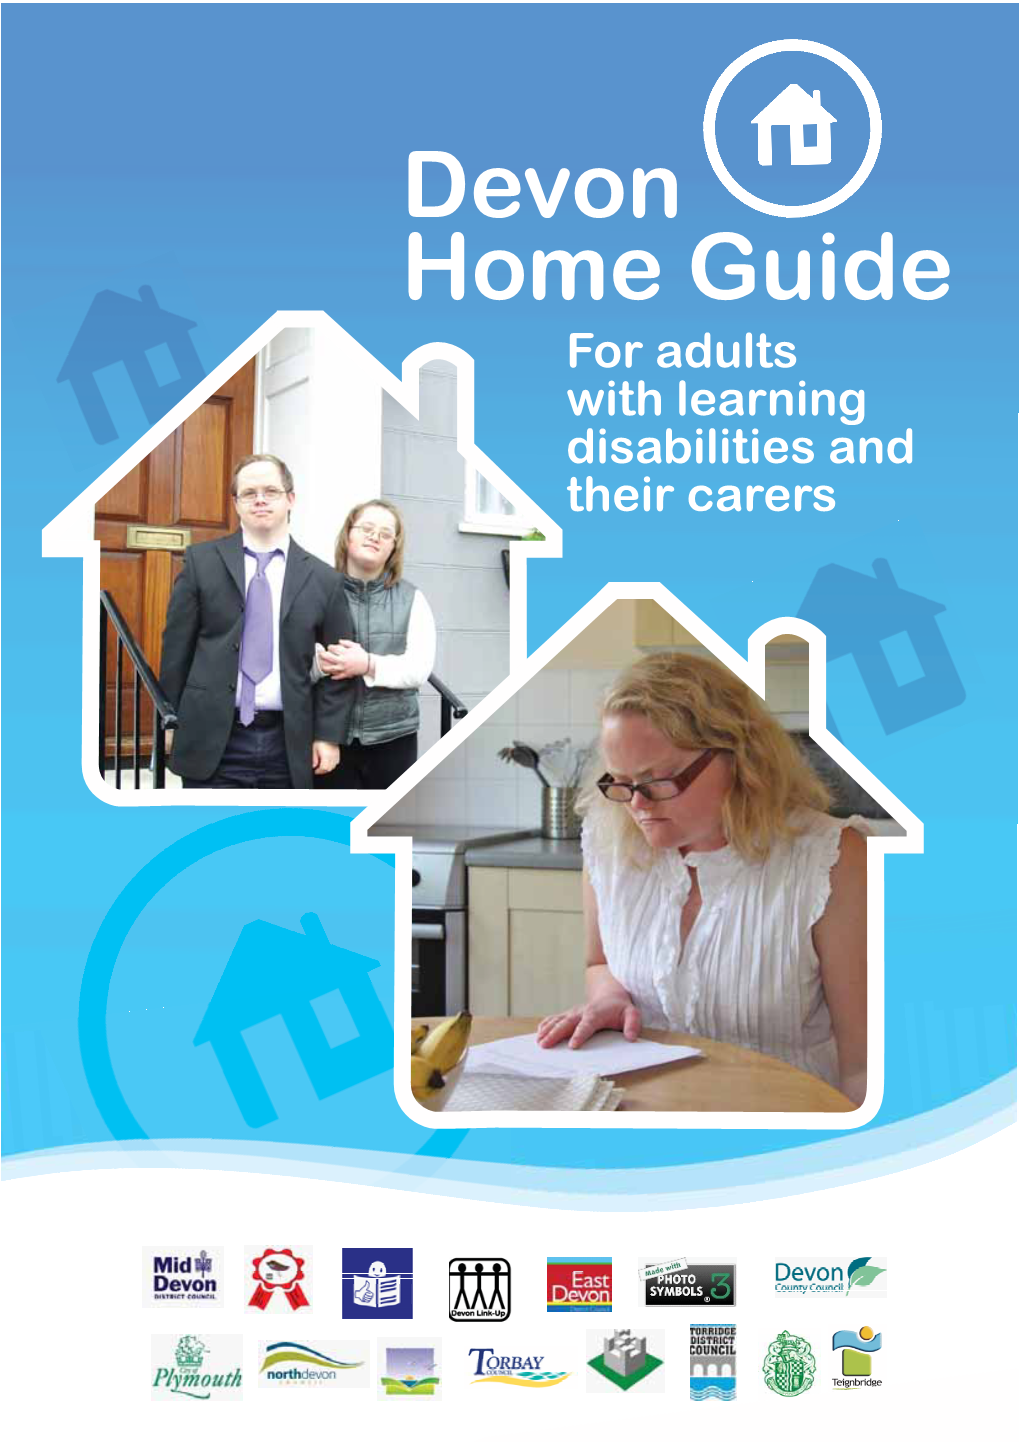 Devon Home Guide for Adults with Learning Disabilities and Their Carers